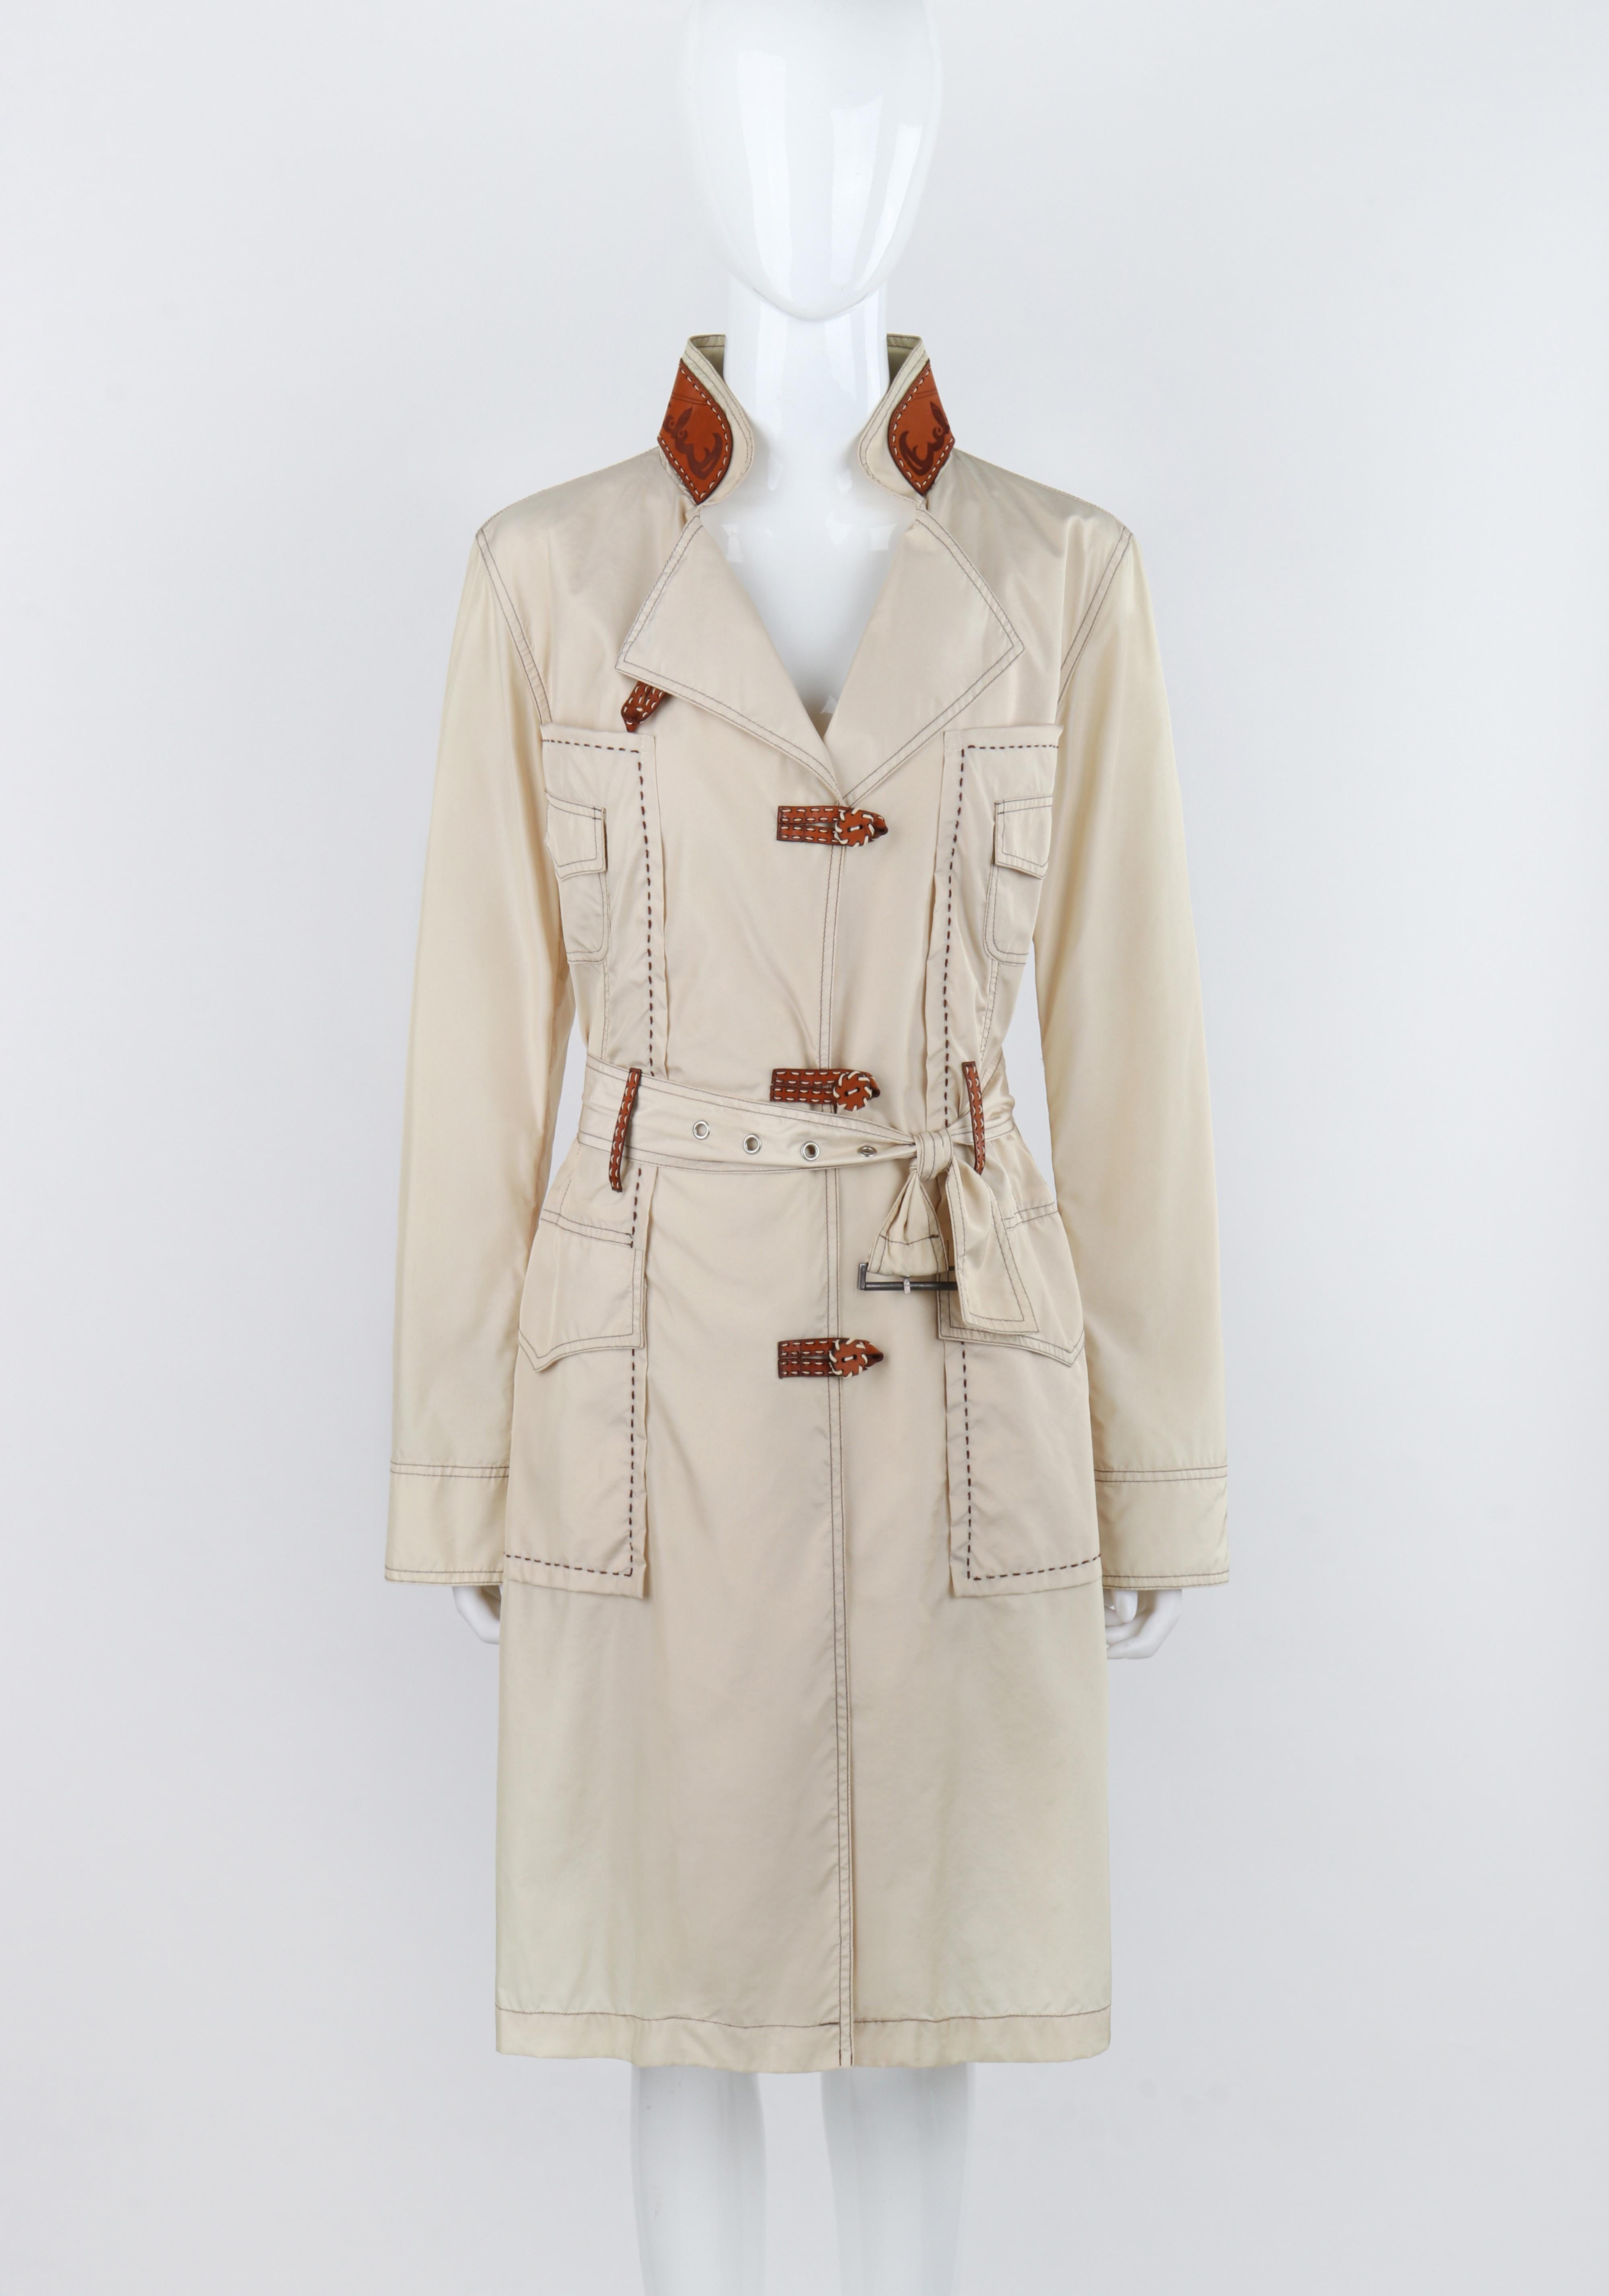 ALEXANDER McQUEEN c.1996 Vtg Beige Leather Accent Western Trench Coat Overcoat 

Brand / Manufacturer: Alexander McQueen
Circa: 1996
Designer: Alexander McQueen
Style: Trench Coat
Color(s): Beige, Brown
Lined: No
Marked Fabric: 75% Nylon, 25%